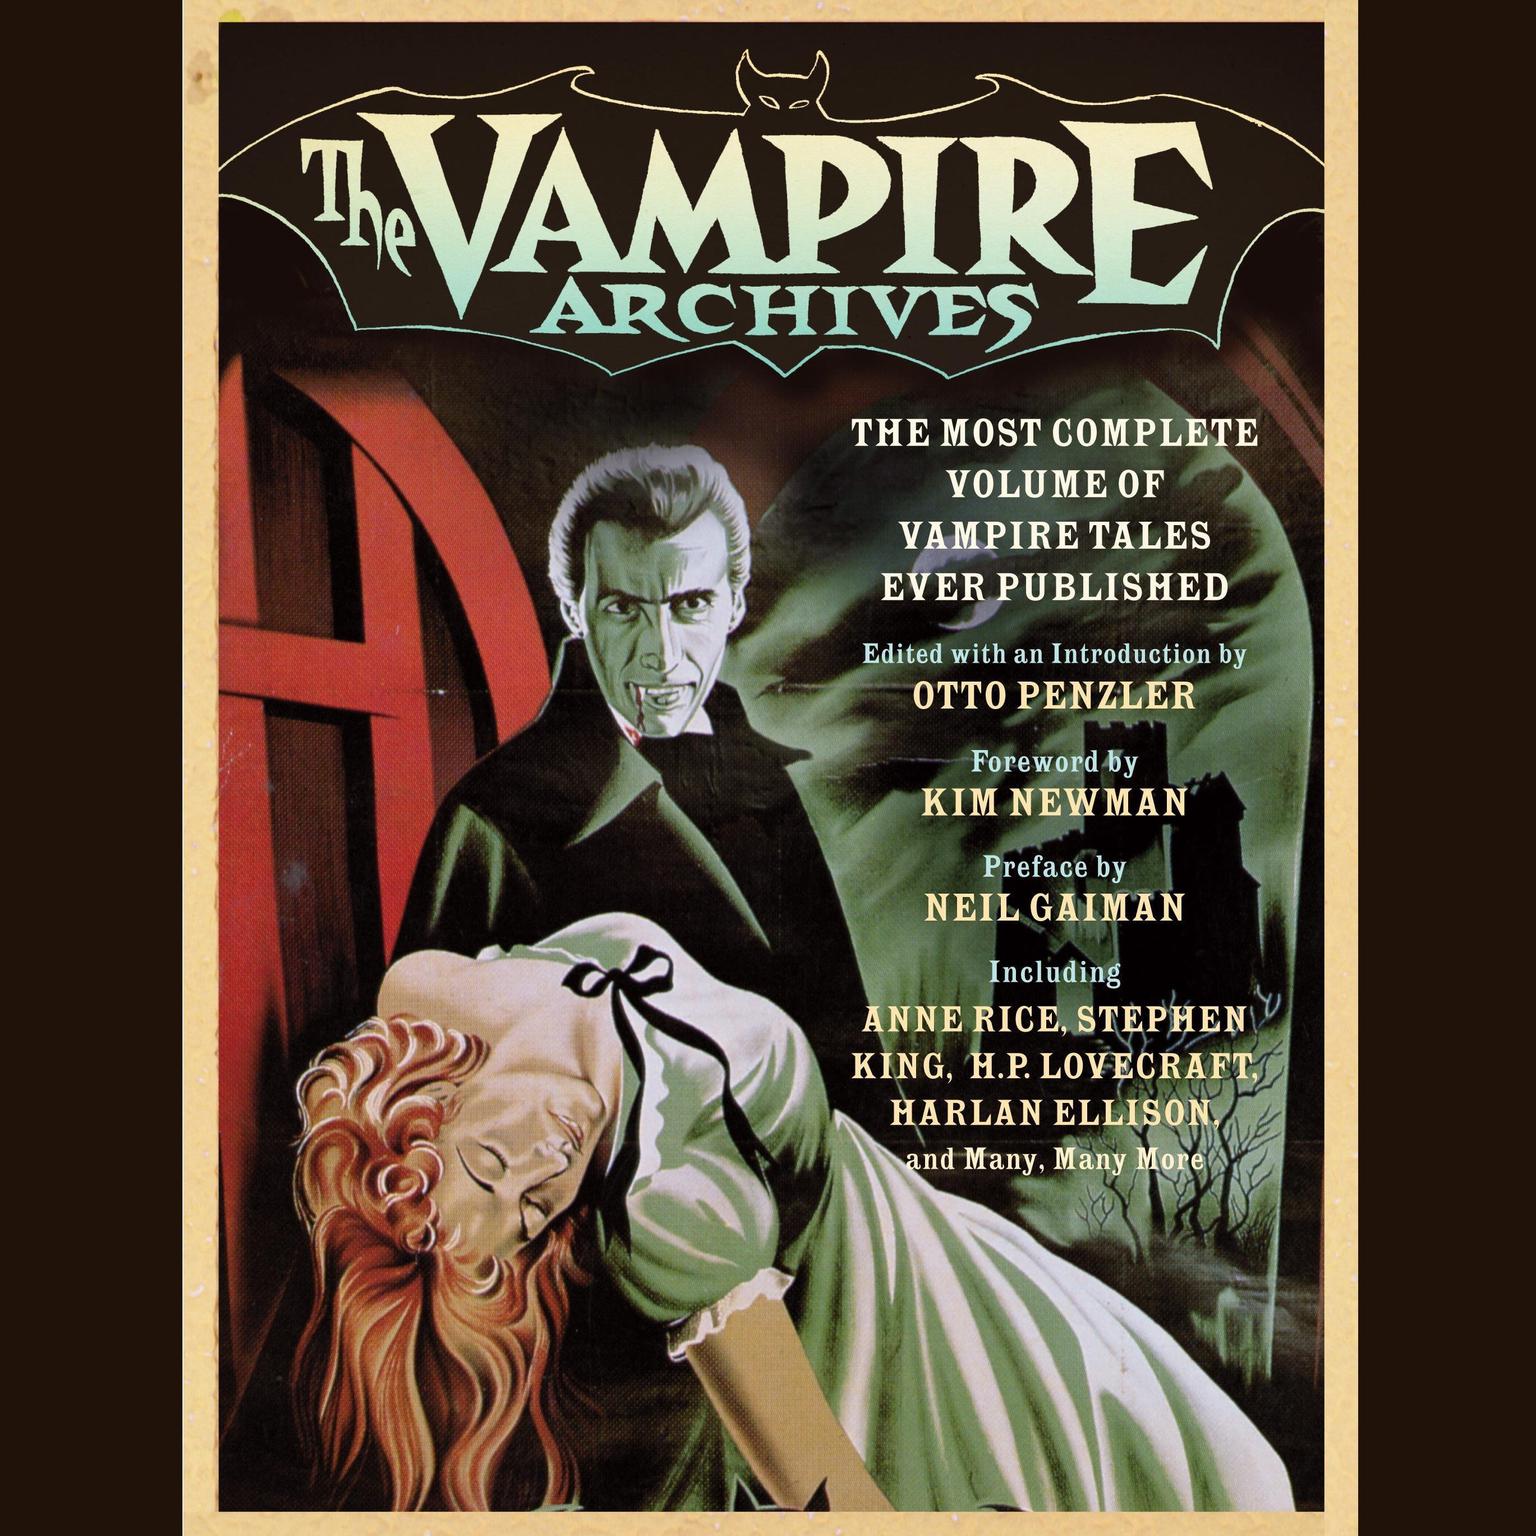 The Vampire Archives: The Most Complete Volume of Vampire Tales Ever Published Audiobook, by Otto Penzler